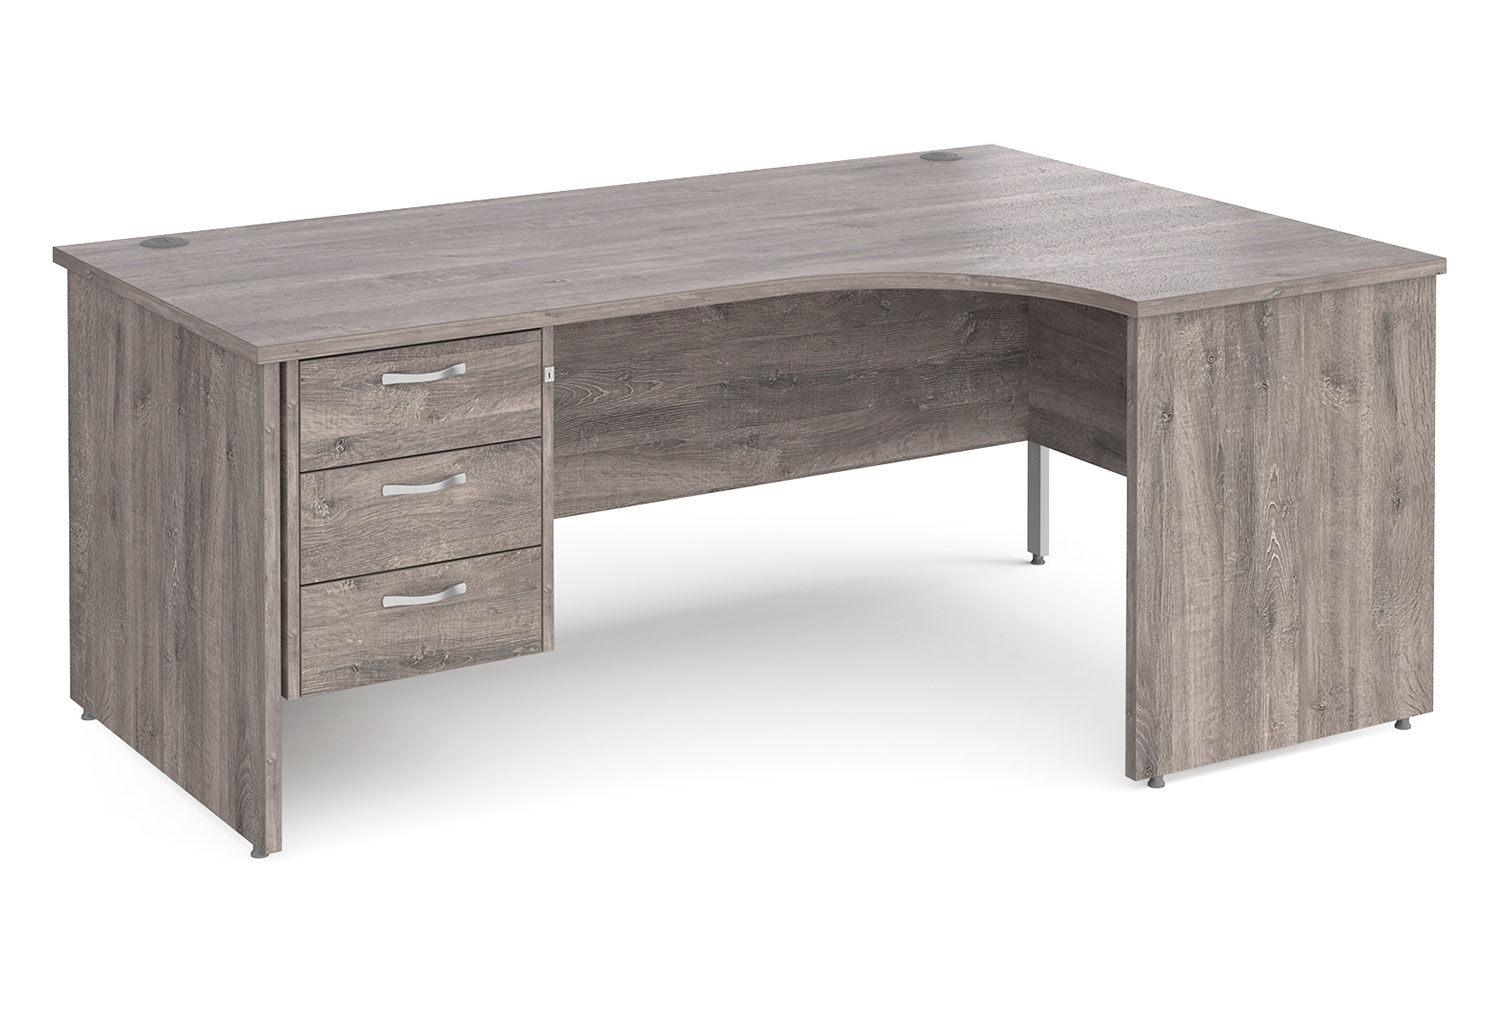 Tully Panel End Right Hand Ergonomic Office Desk 3 Drawers, 180wx120/80dx73h (cm), Grey Oak, Fully Installed